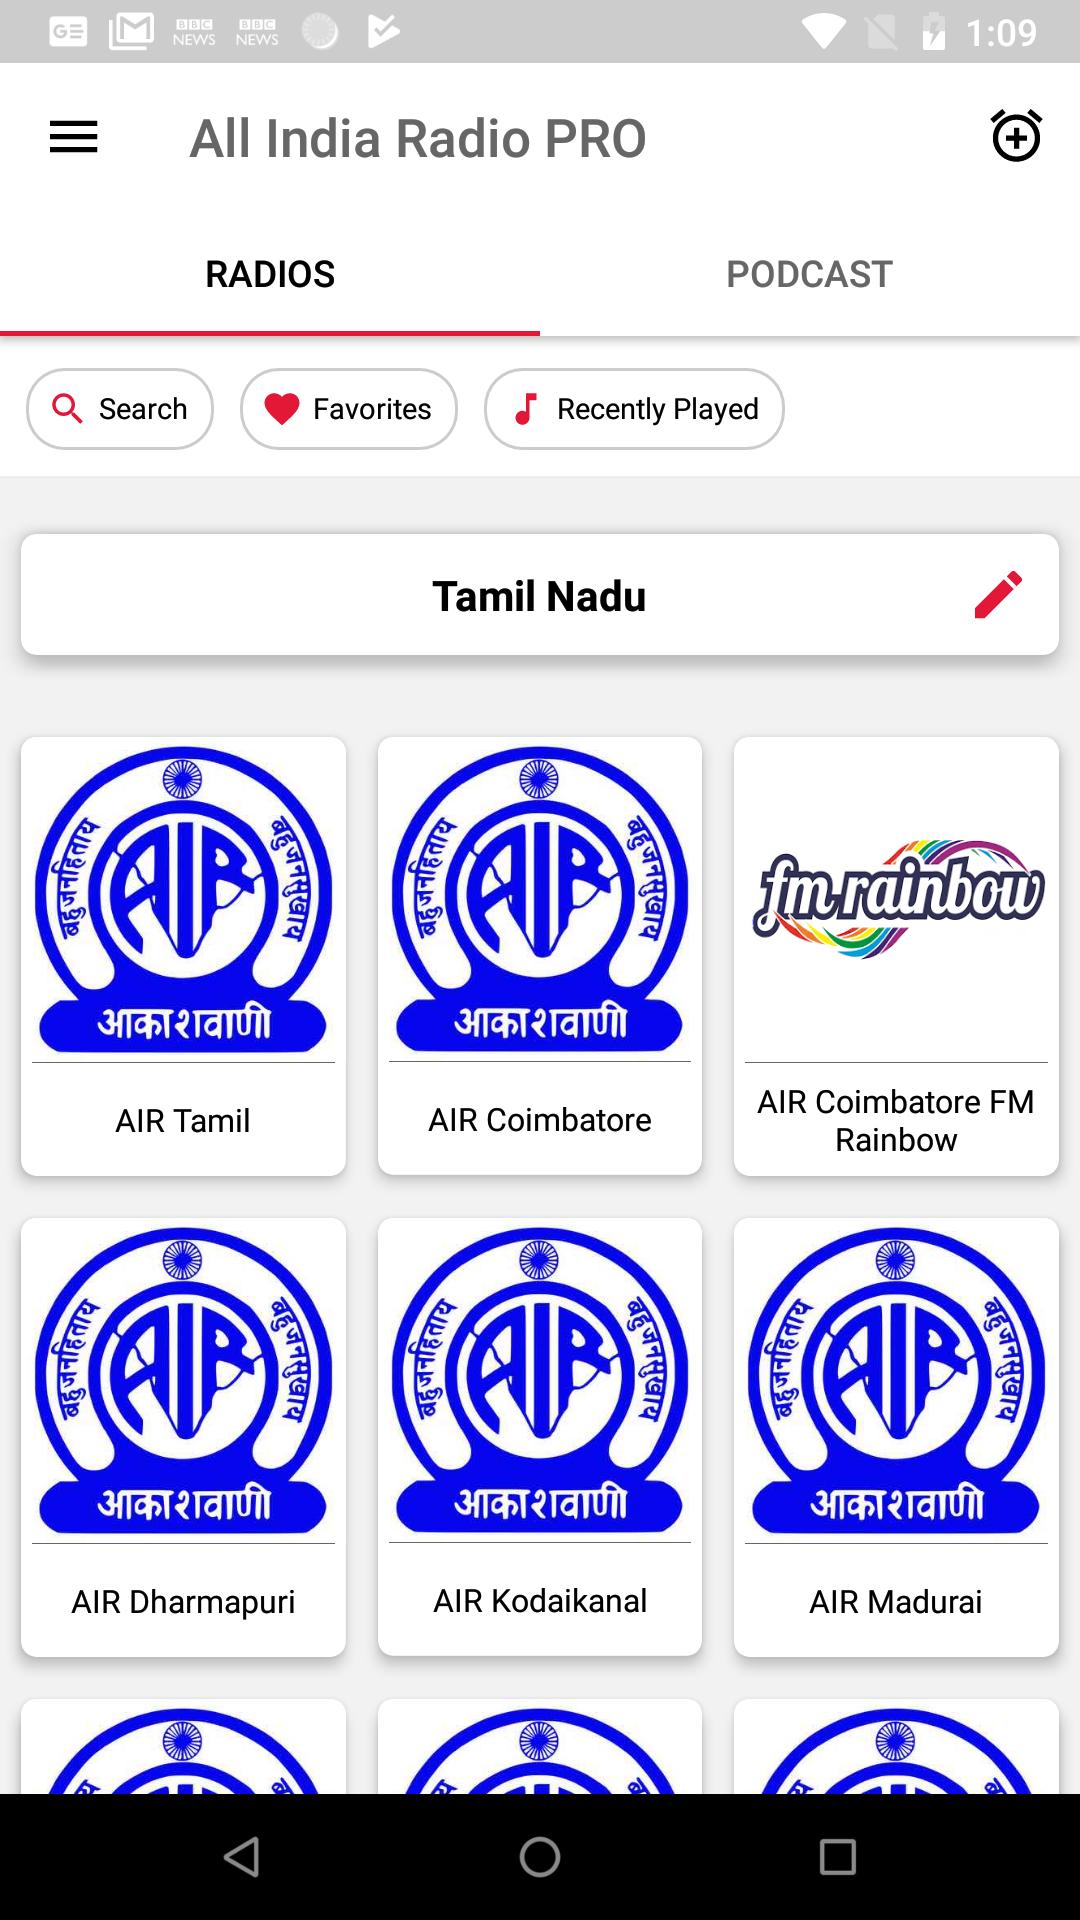 All India Radio Live : Podcast, News, Live Radios for Android - APK Download